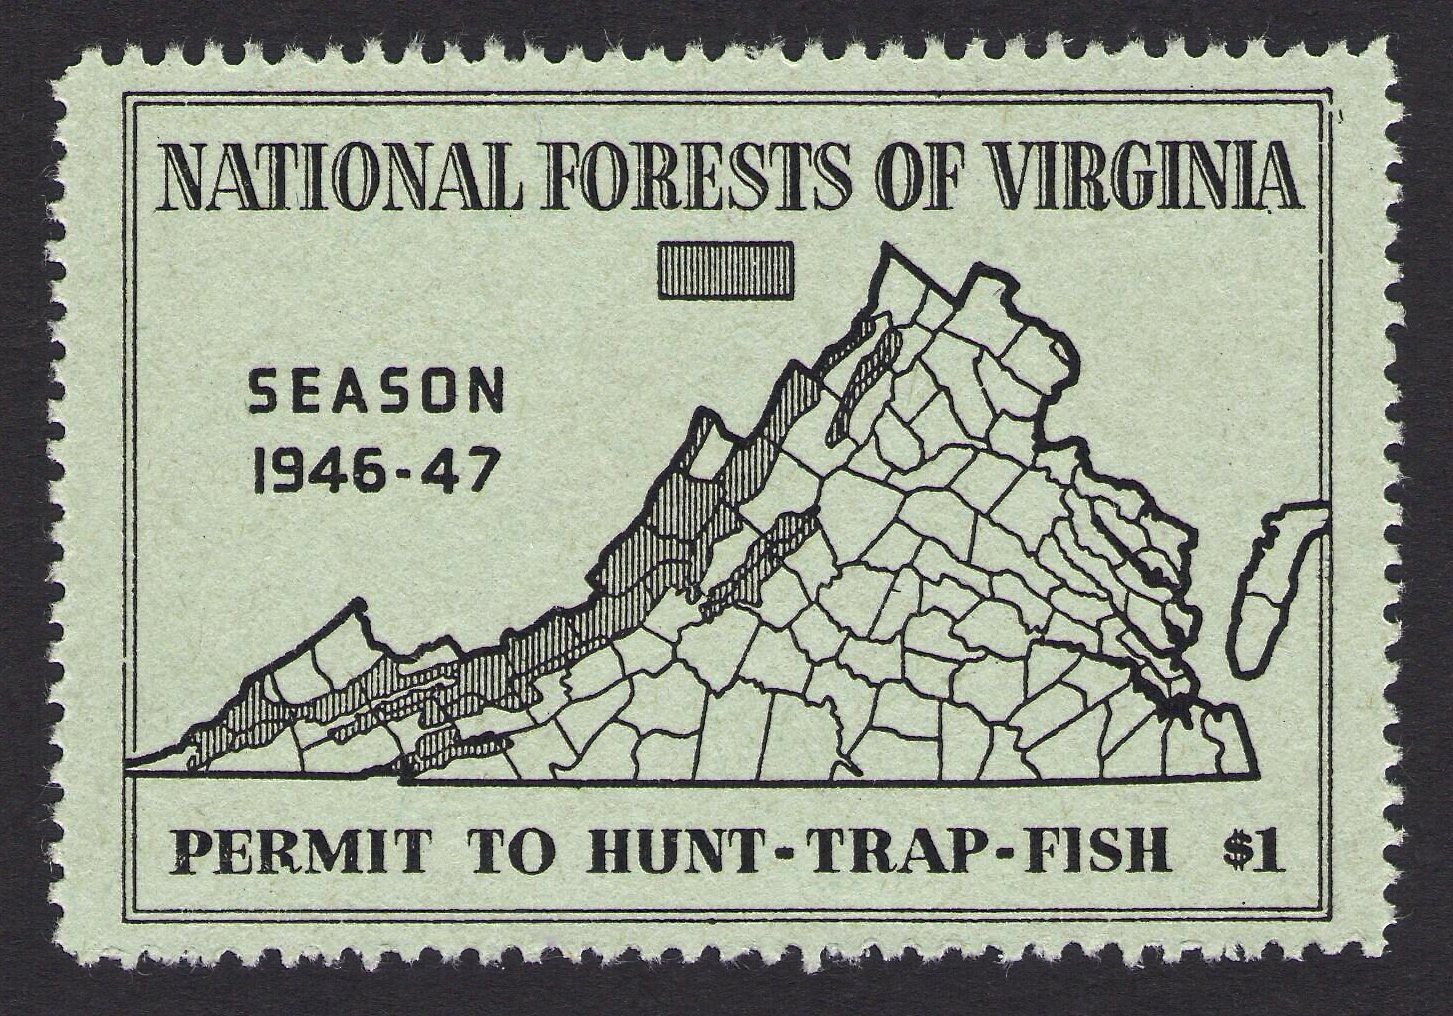 1946-47 National Forest Virginia